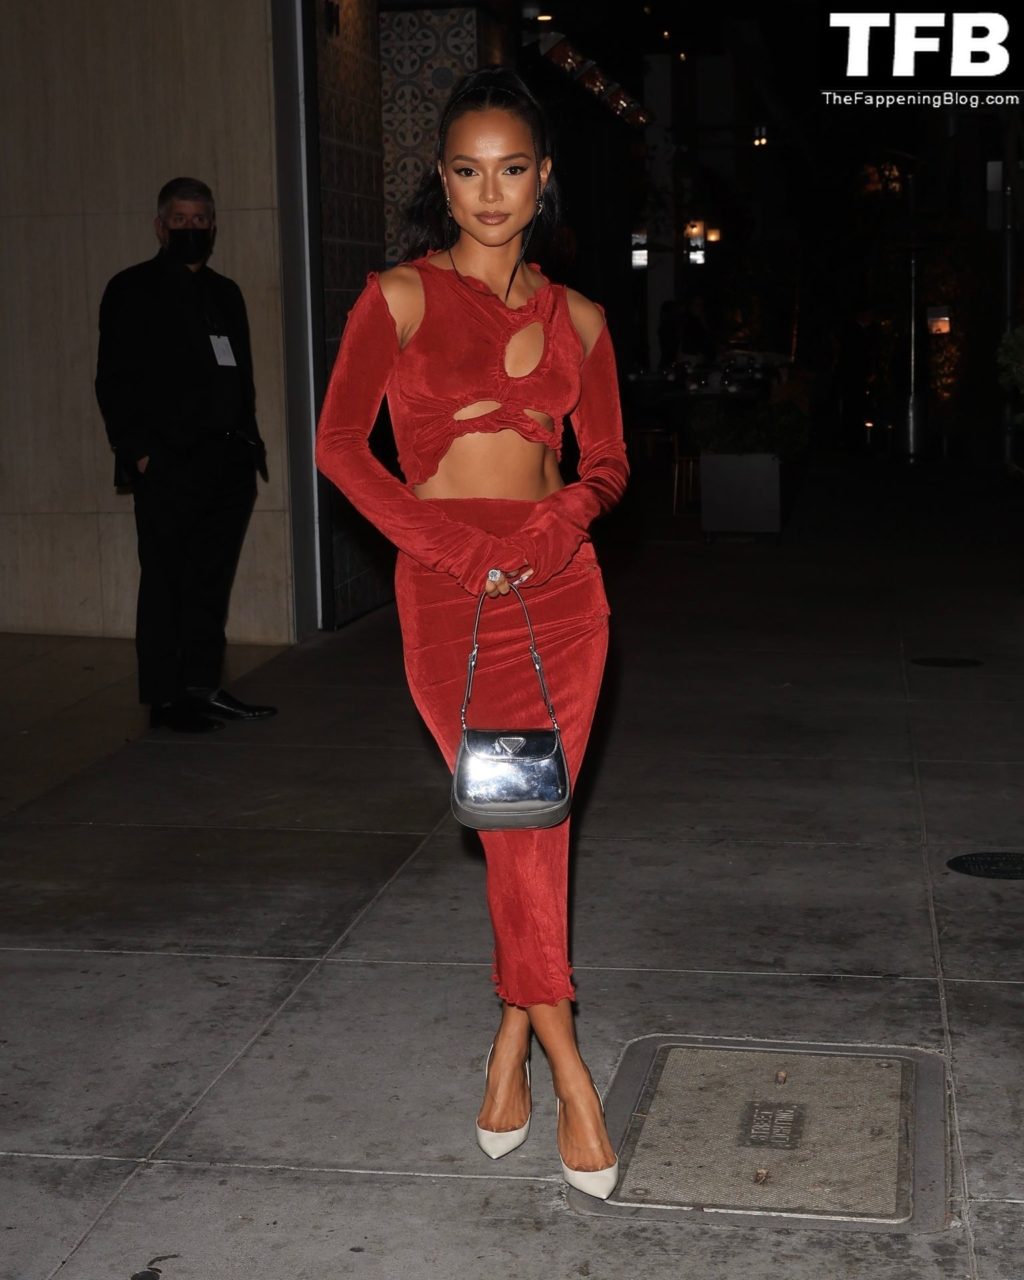 Karrueche Tran Sexy The Fappening Blog 7 1 1024x1280 - Karrueche Tran Shows Her Pokies in a Red Dress at The Hollywood Reporter’s Oscar Nominees Night (68 Photos)